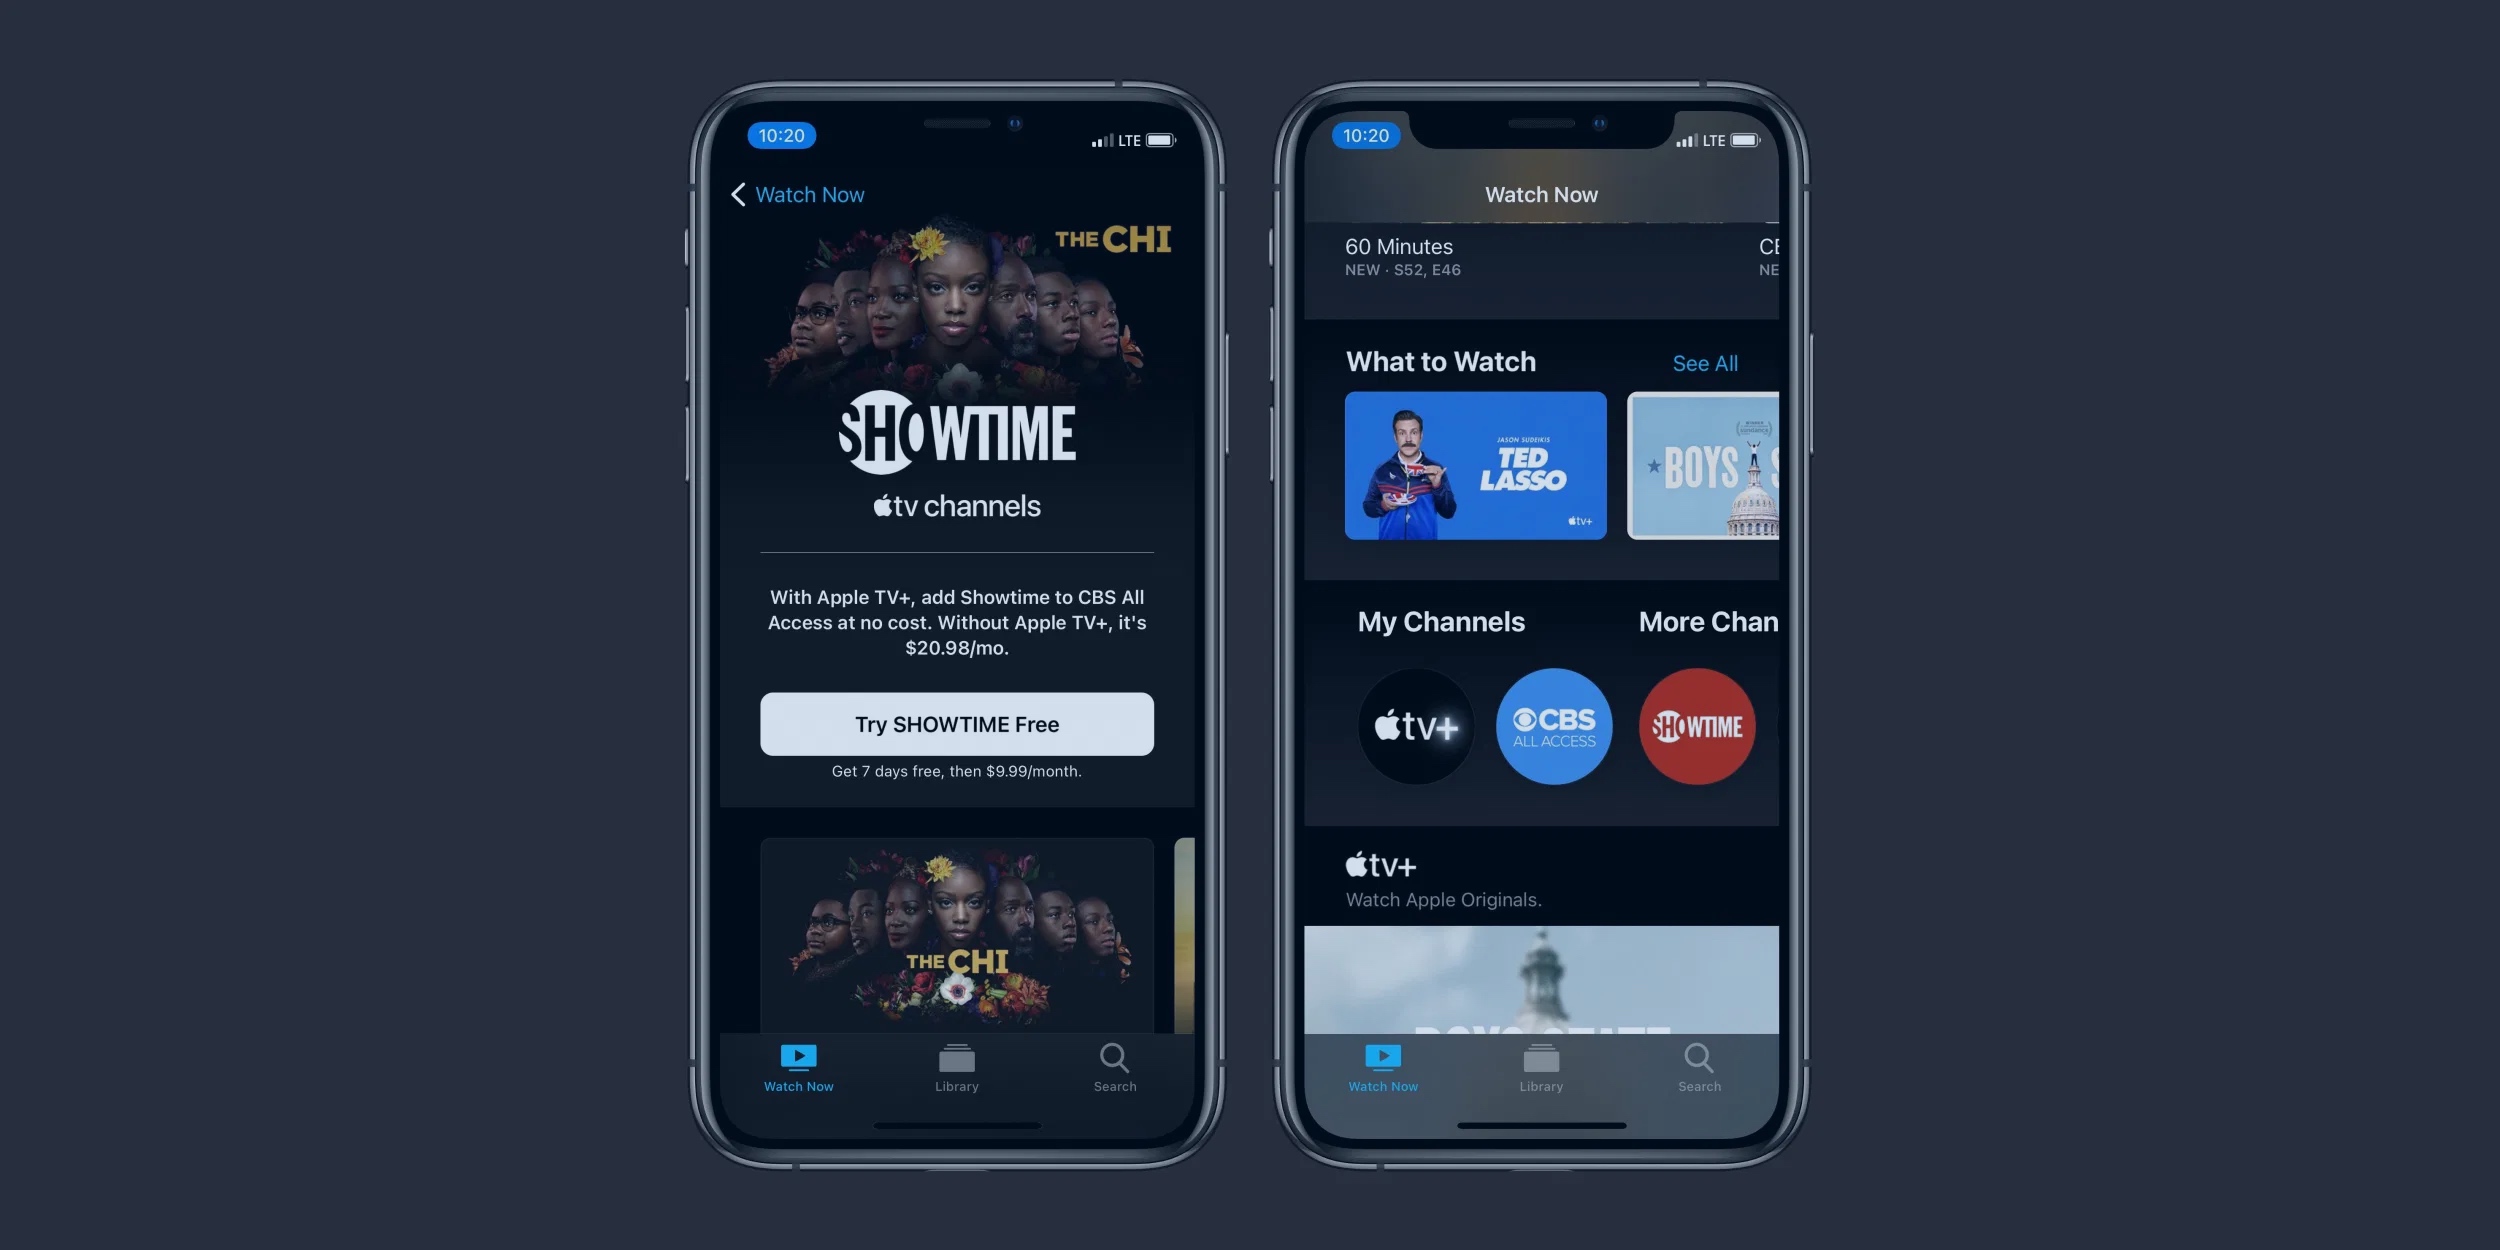 Cbs And Showtime Bundle No Longer Available Through Apple Tv App Ahead Of Paramount Launch 9to5mac